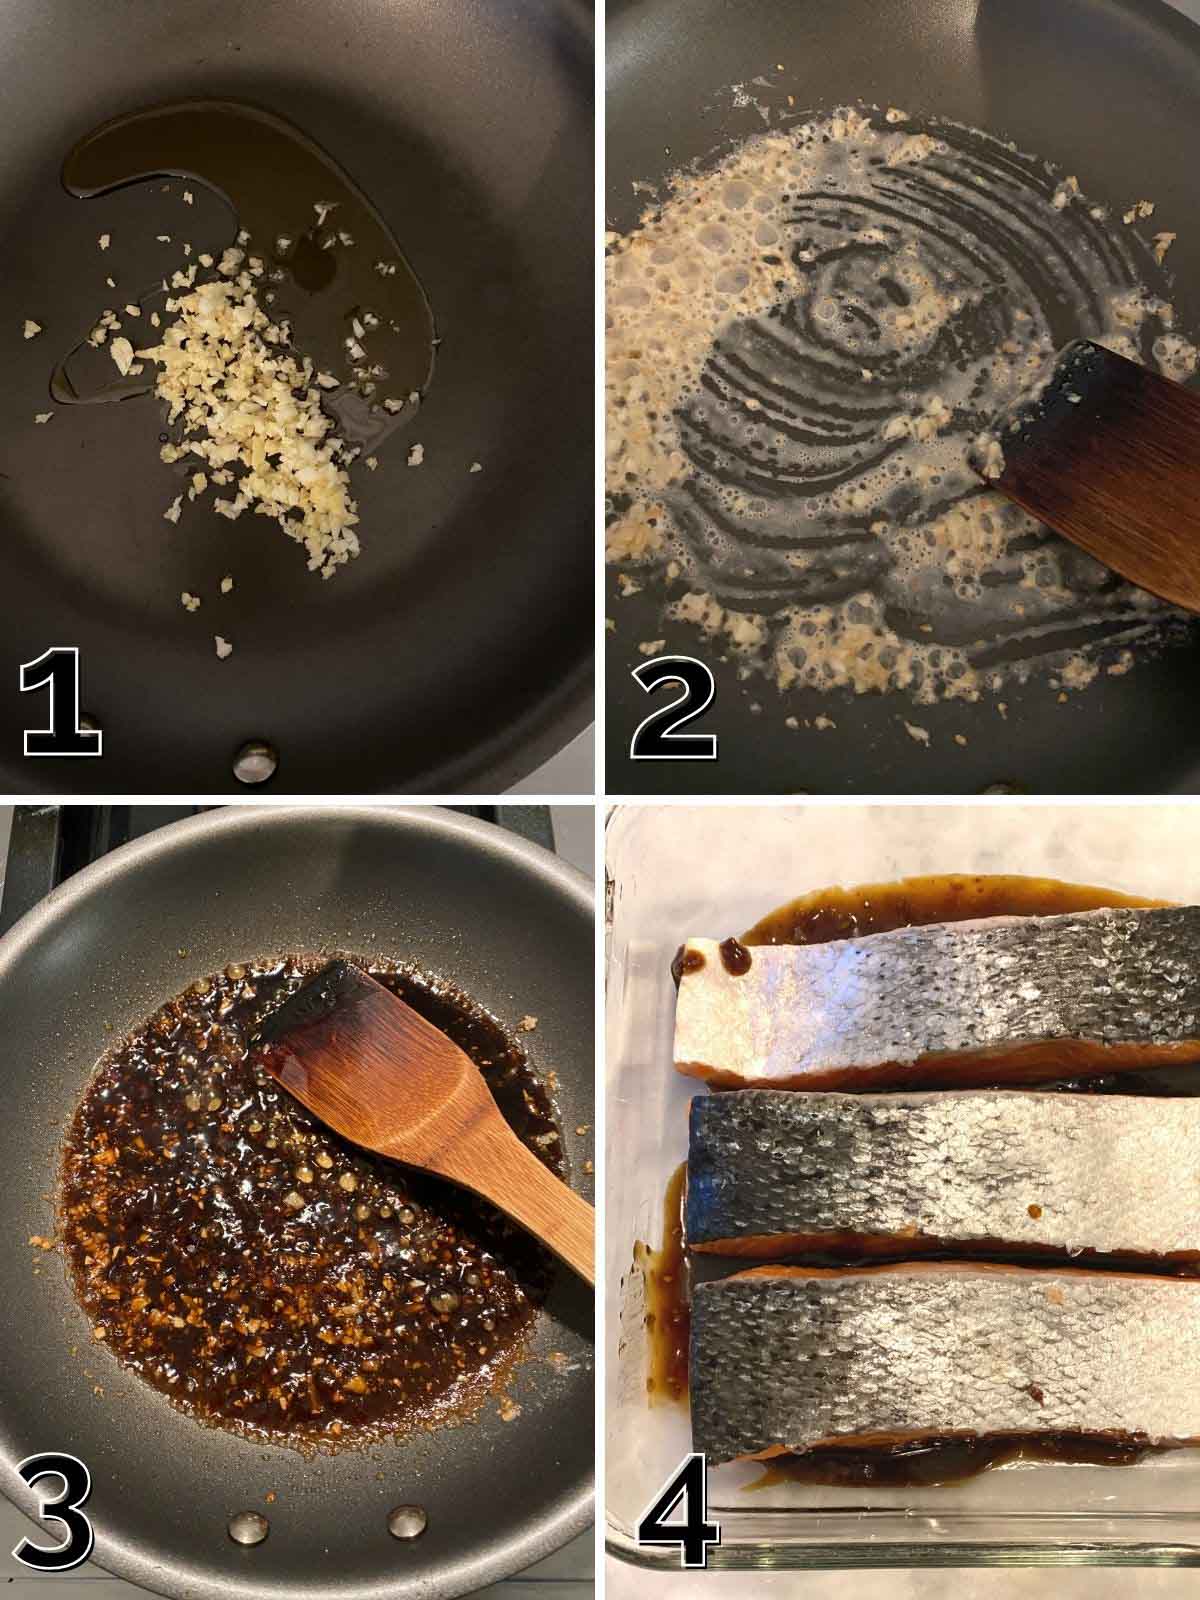 A step by step process for making teriyaki sauce and marinating salmon in it.